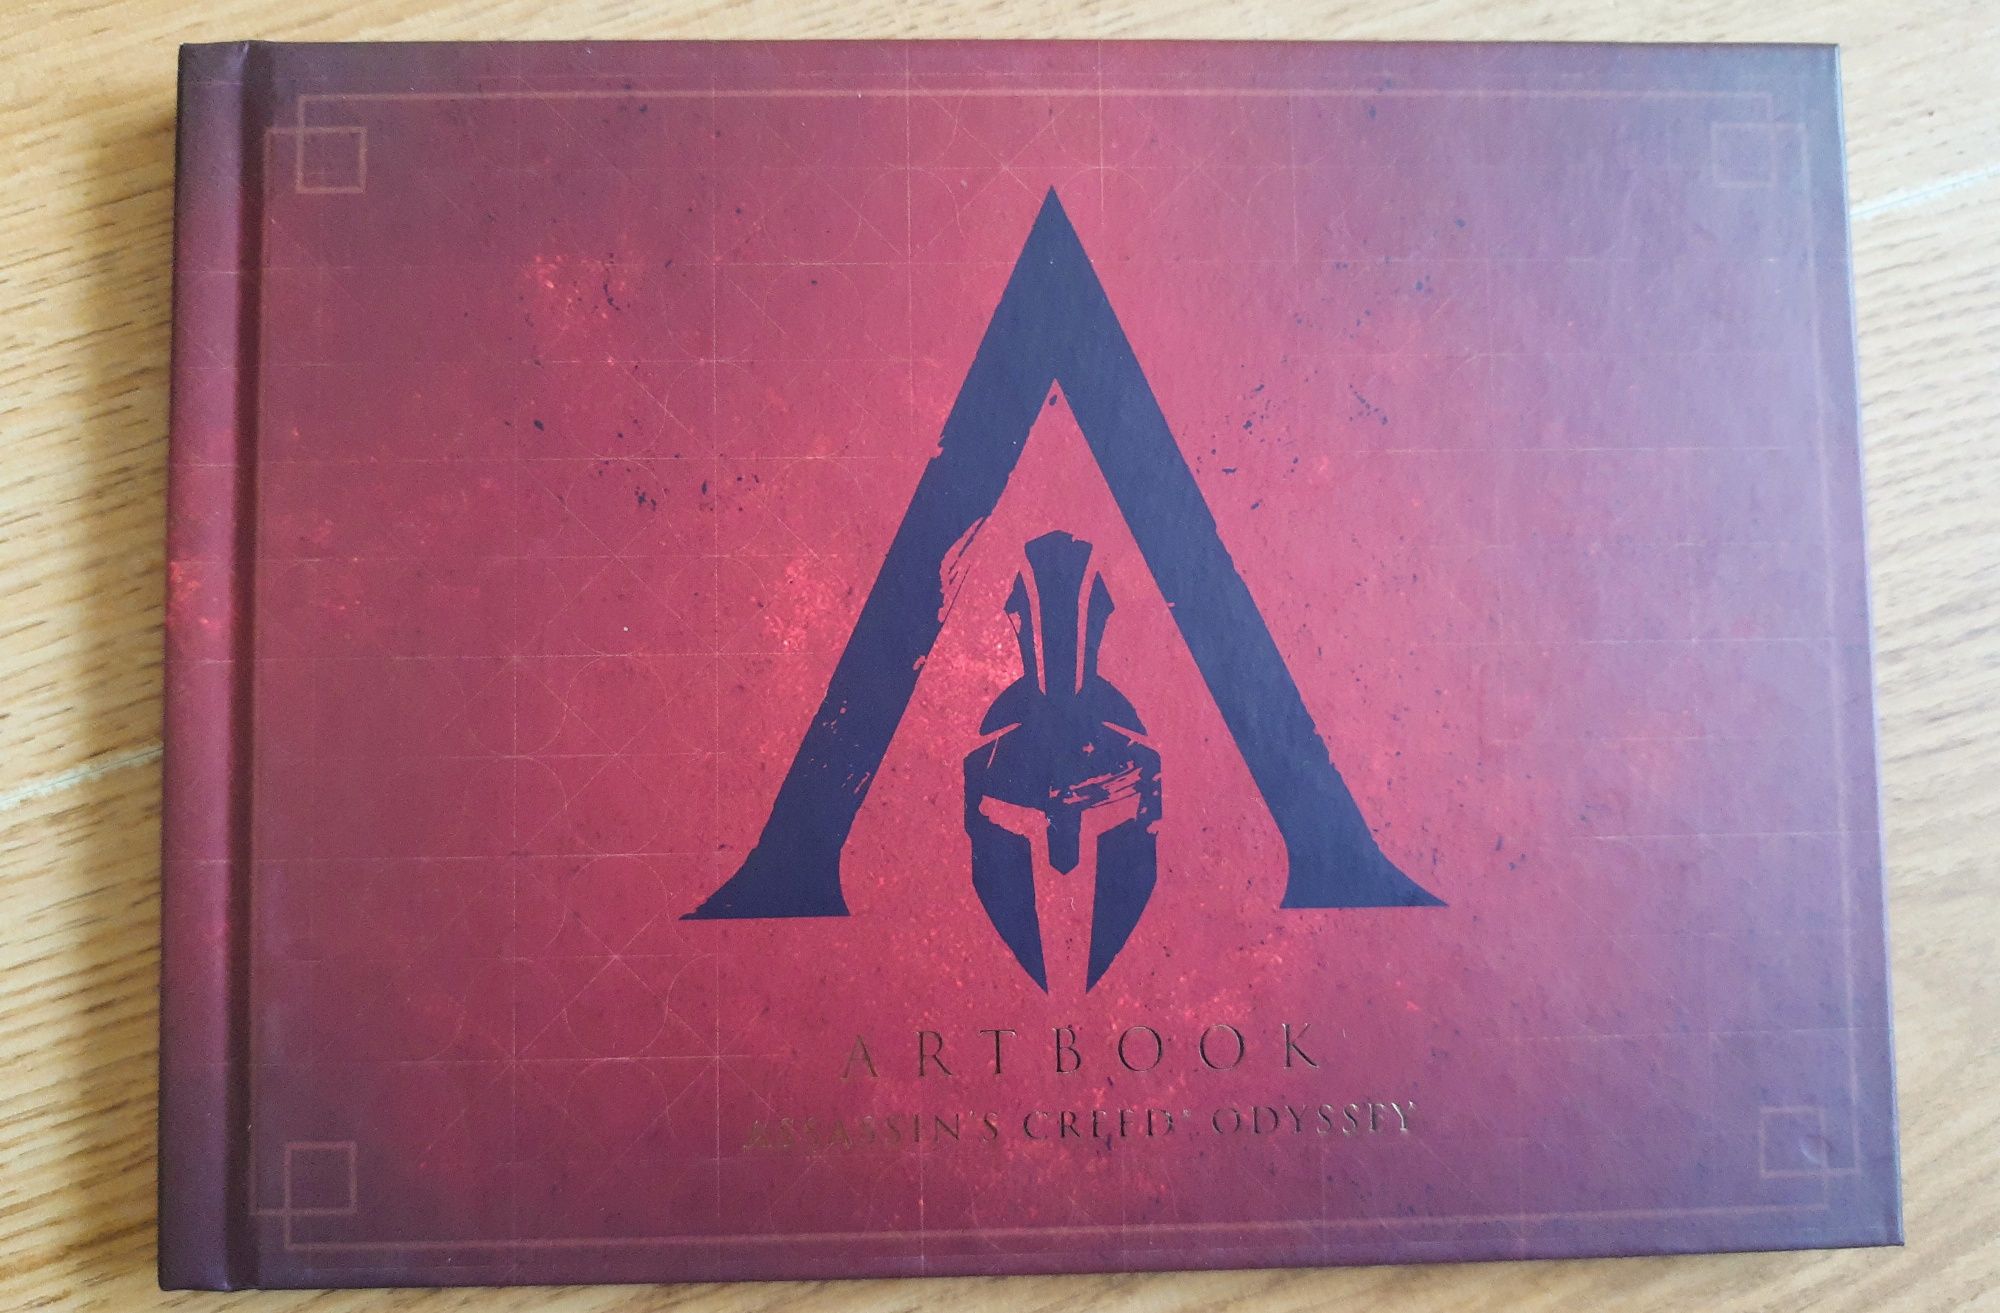 Assassin's Assassins Creed Odyssey PS4 Ps5 PC Xbox One Series Artbook.